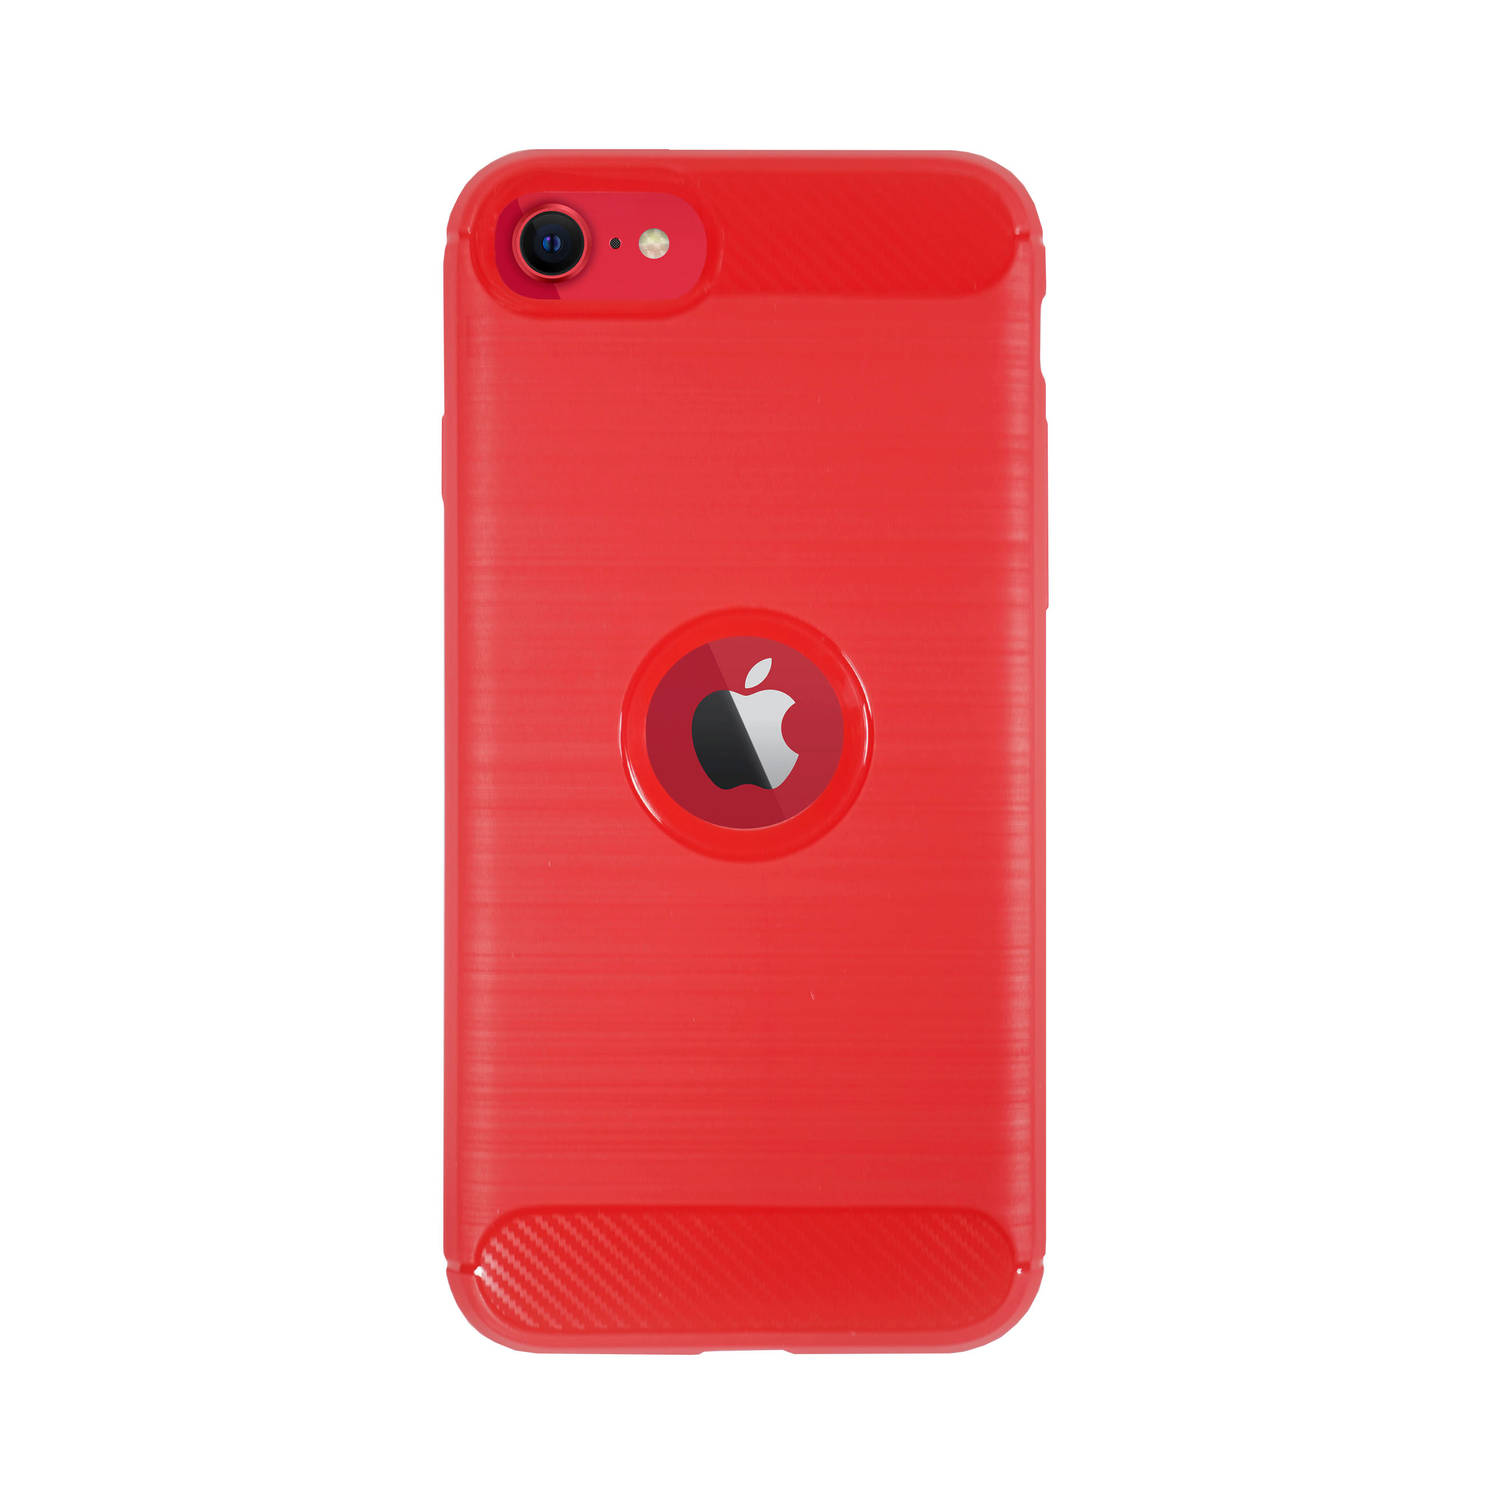 BMAX Carbon soft case hoesje voor iPhone SE 2020 - Red/Rood